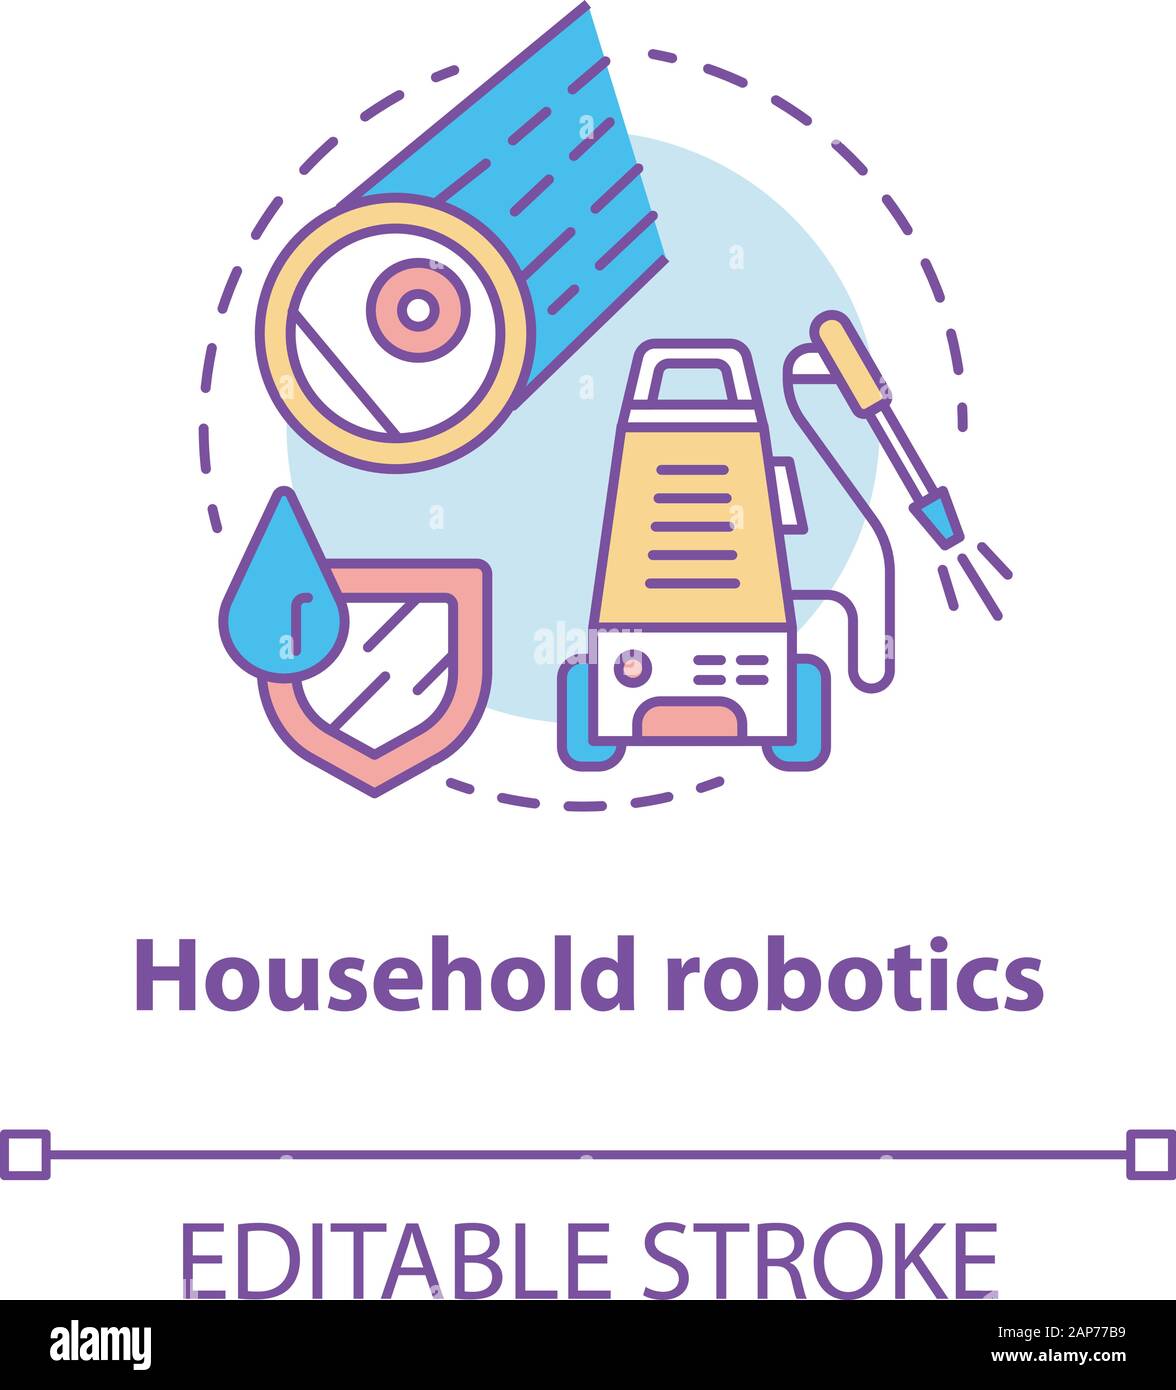 Household robotics concept icon. Domestic robot idea thin line illustration. Modern futuristic technologies. Automated cleaning machines. Vector isola Stock Vector